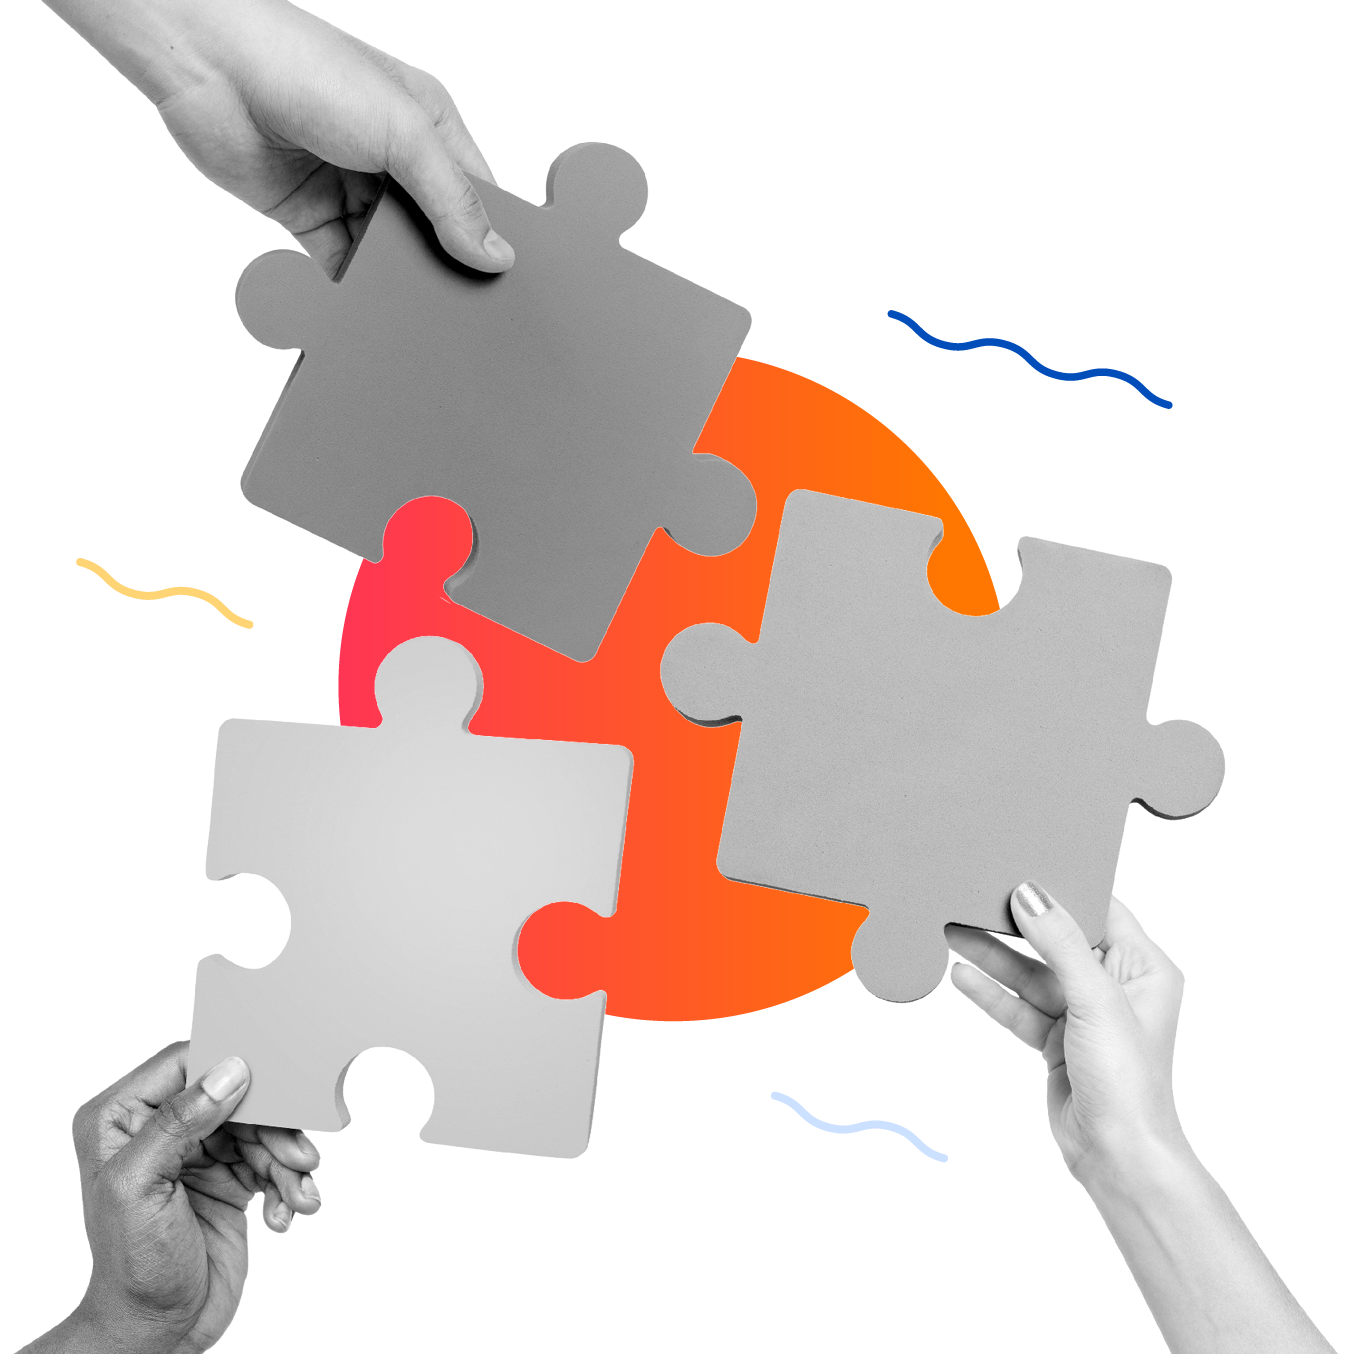 Hands connect giant jigsaw pieces, working together on open source solutions